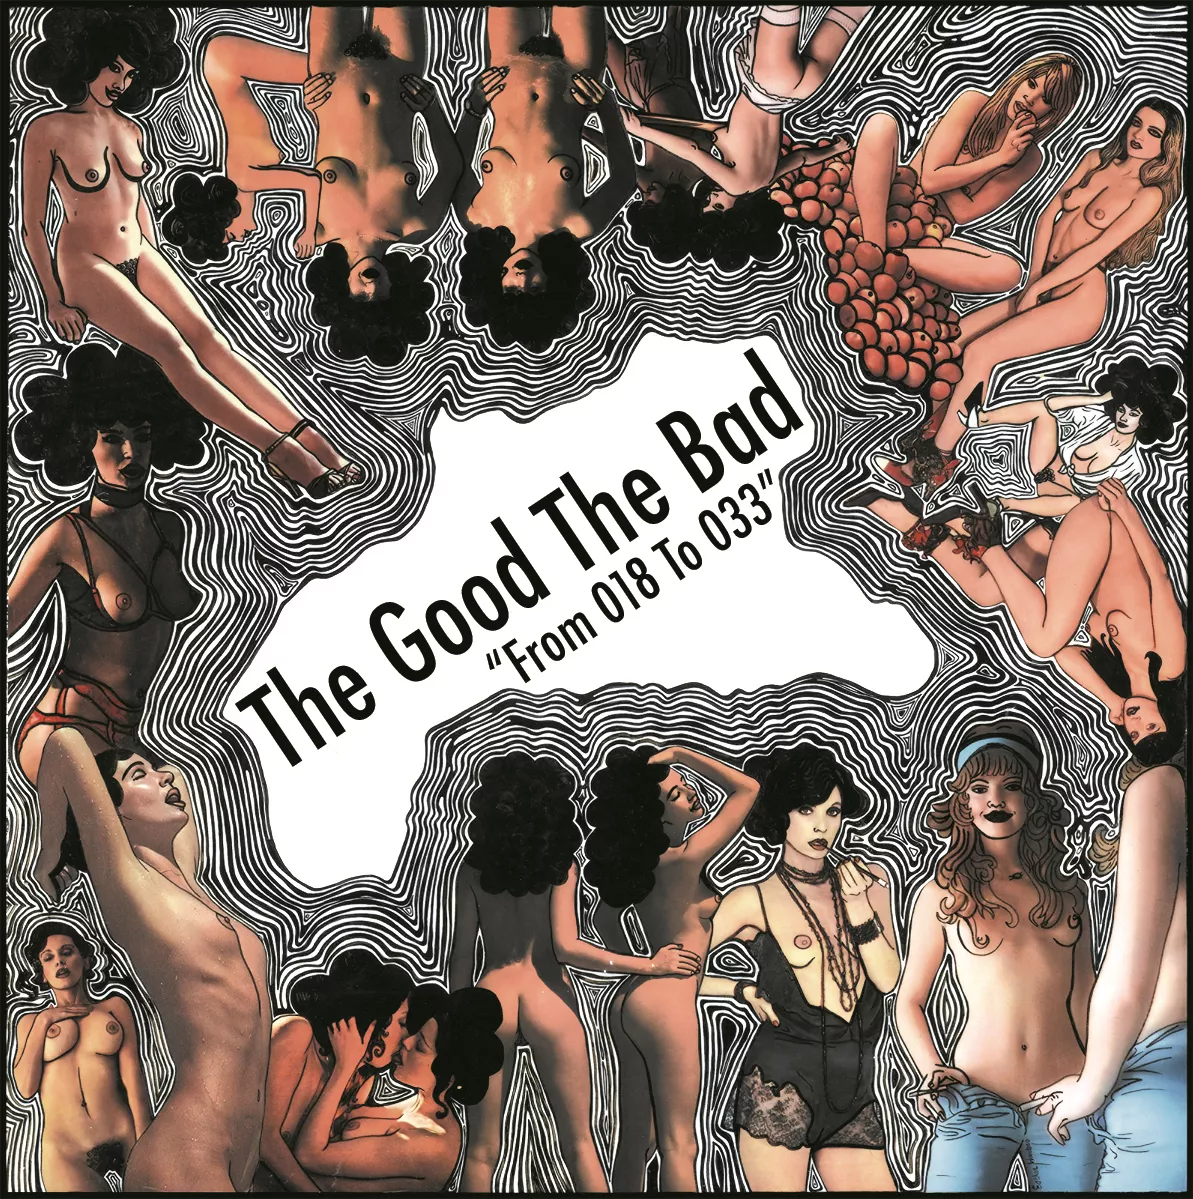 From 018 To 033 - The Good the Bad